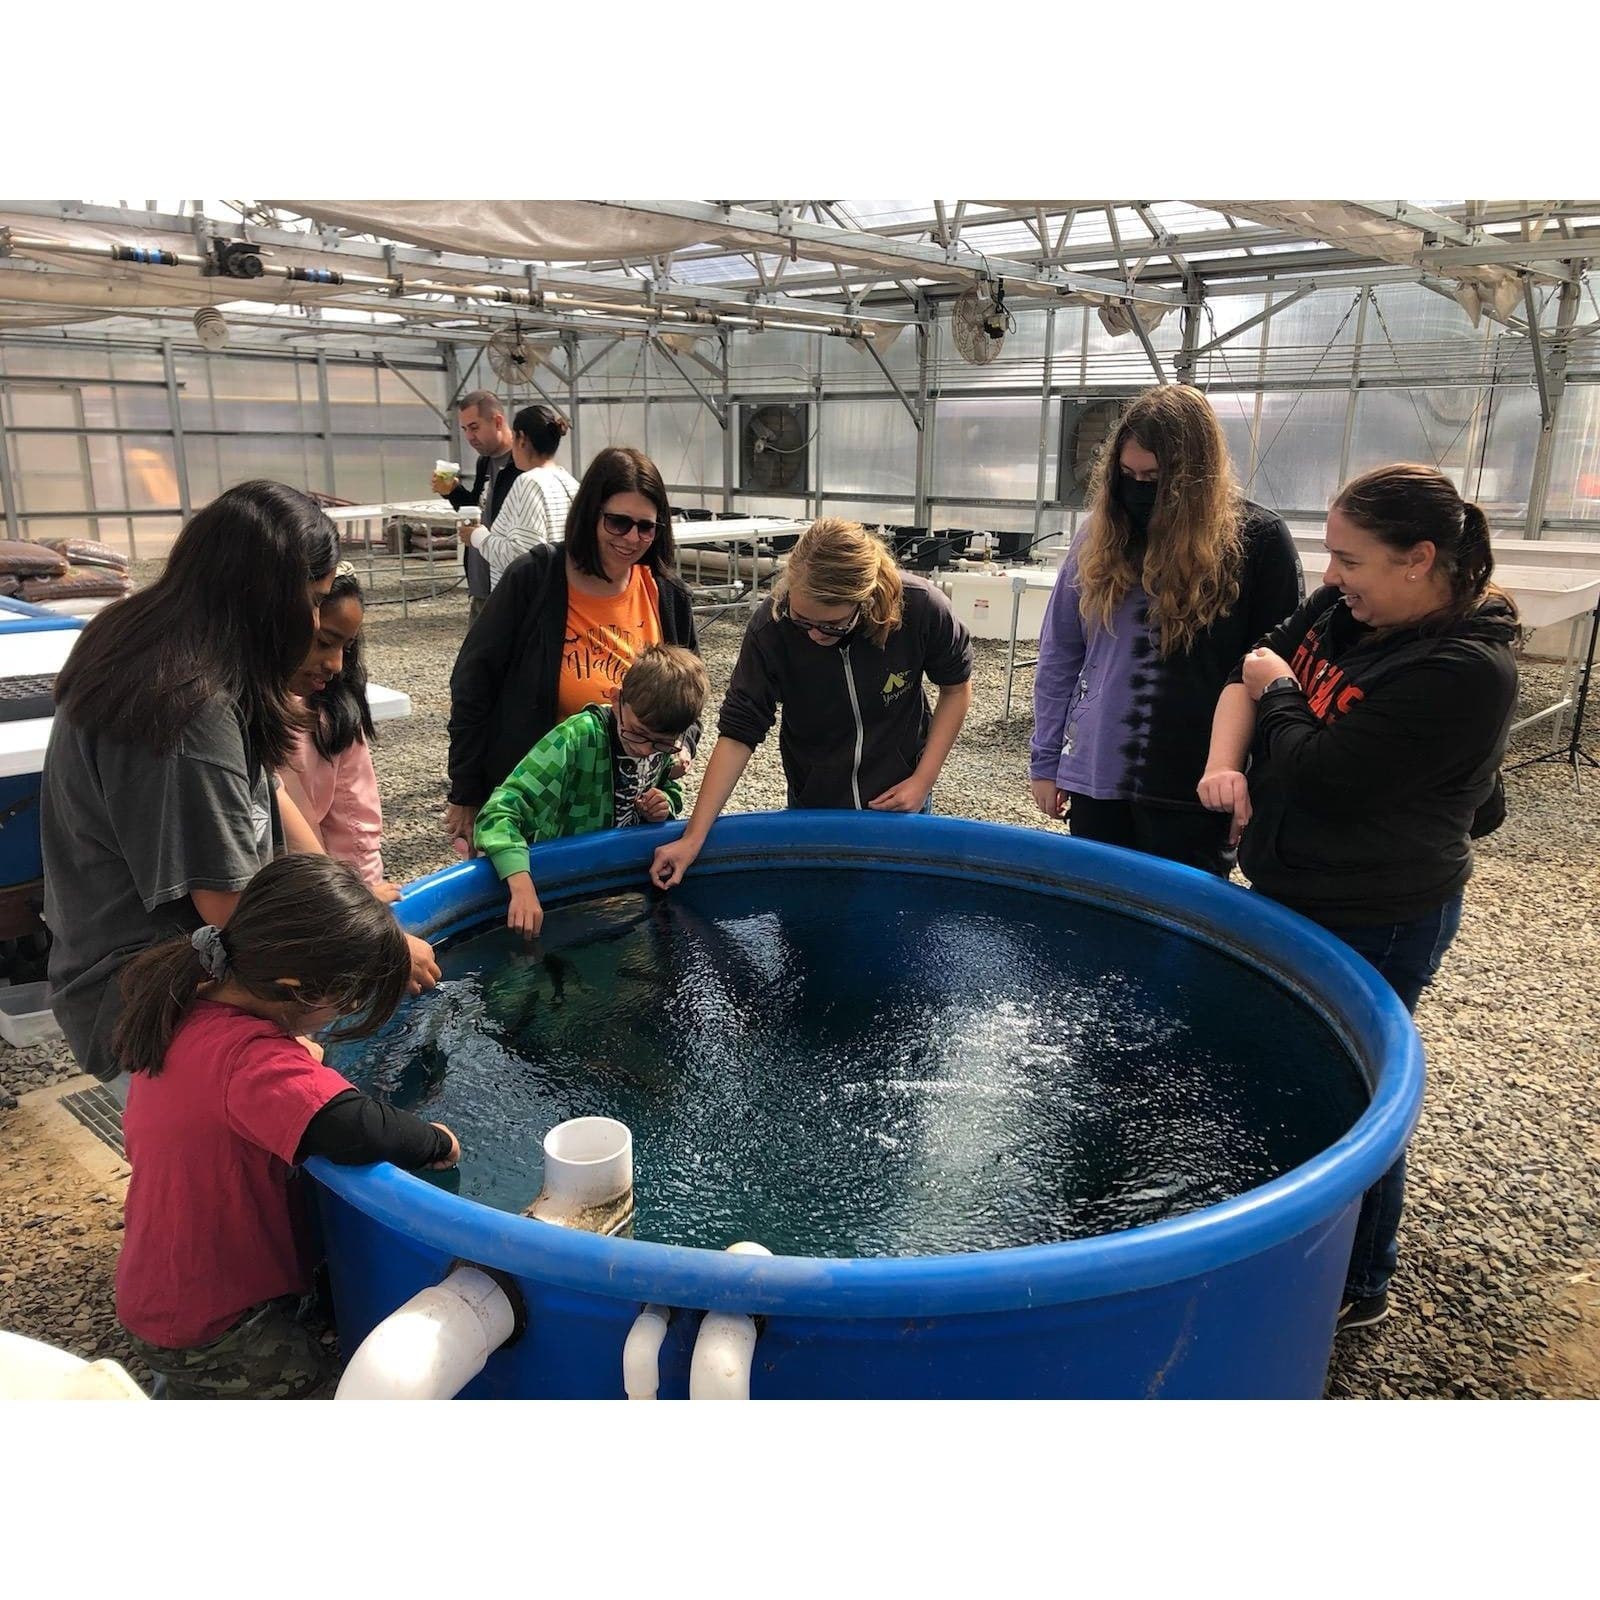 A group of people are participating in a Private Escondido Aquaponics System Tour event by Go Green Aquaponics where they are observing a fish tank in a greenhouse.